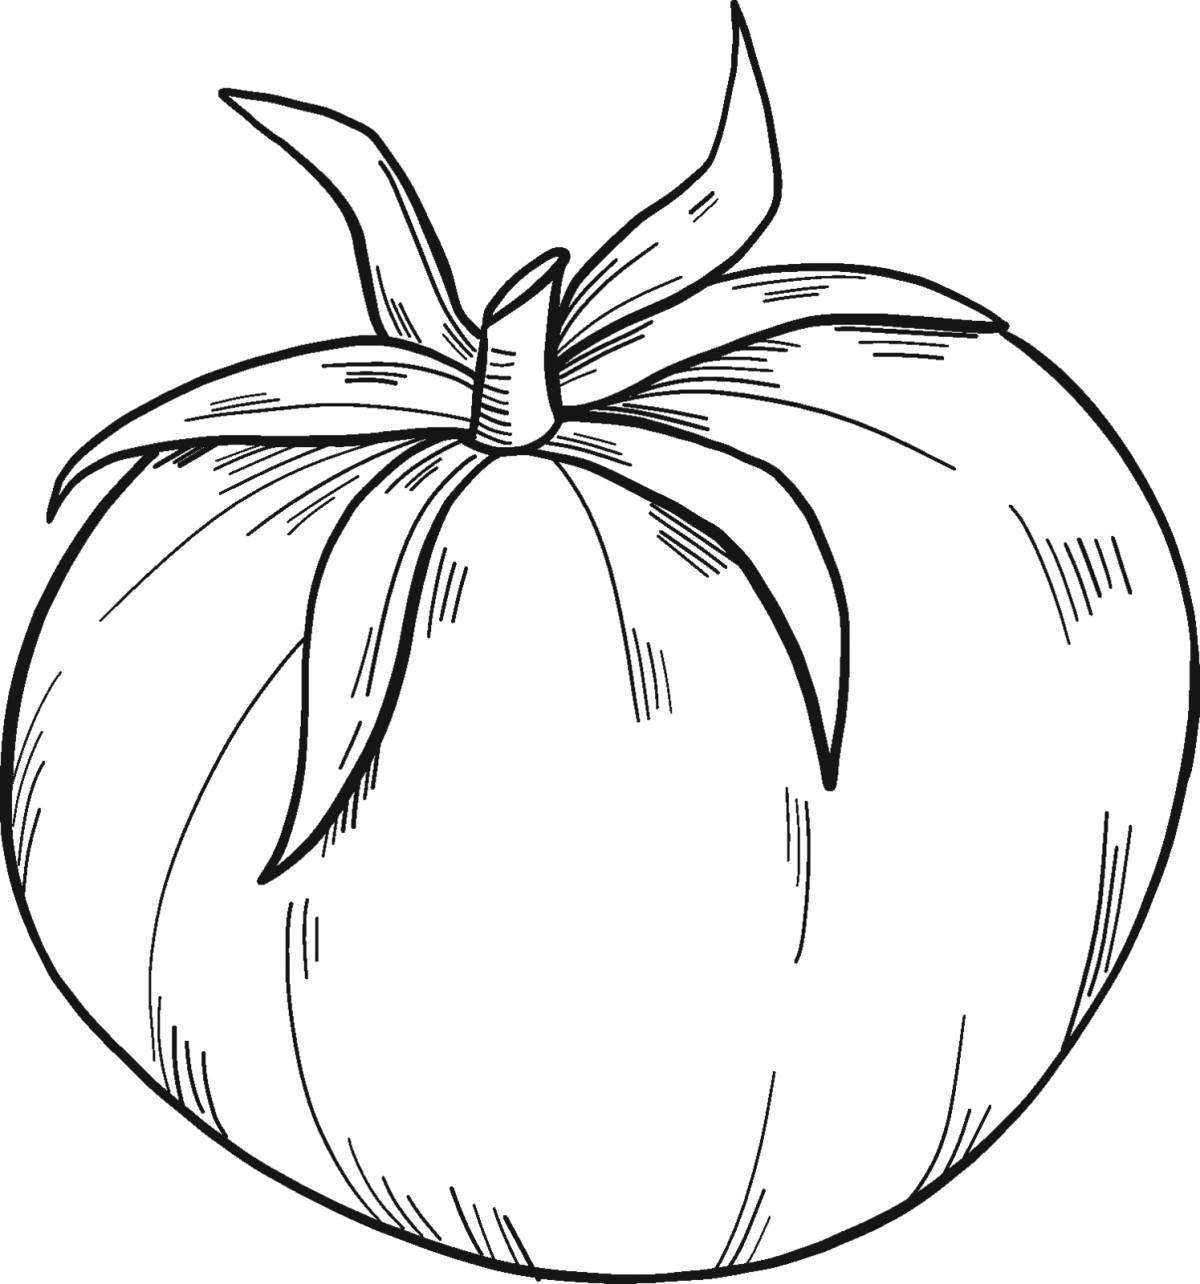 A fun tomato coloring book for 2-3 year olds